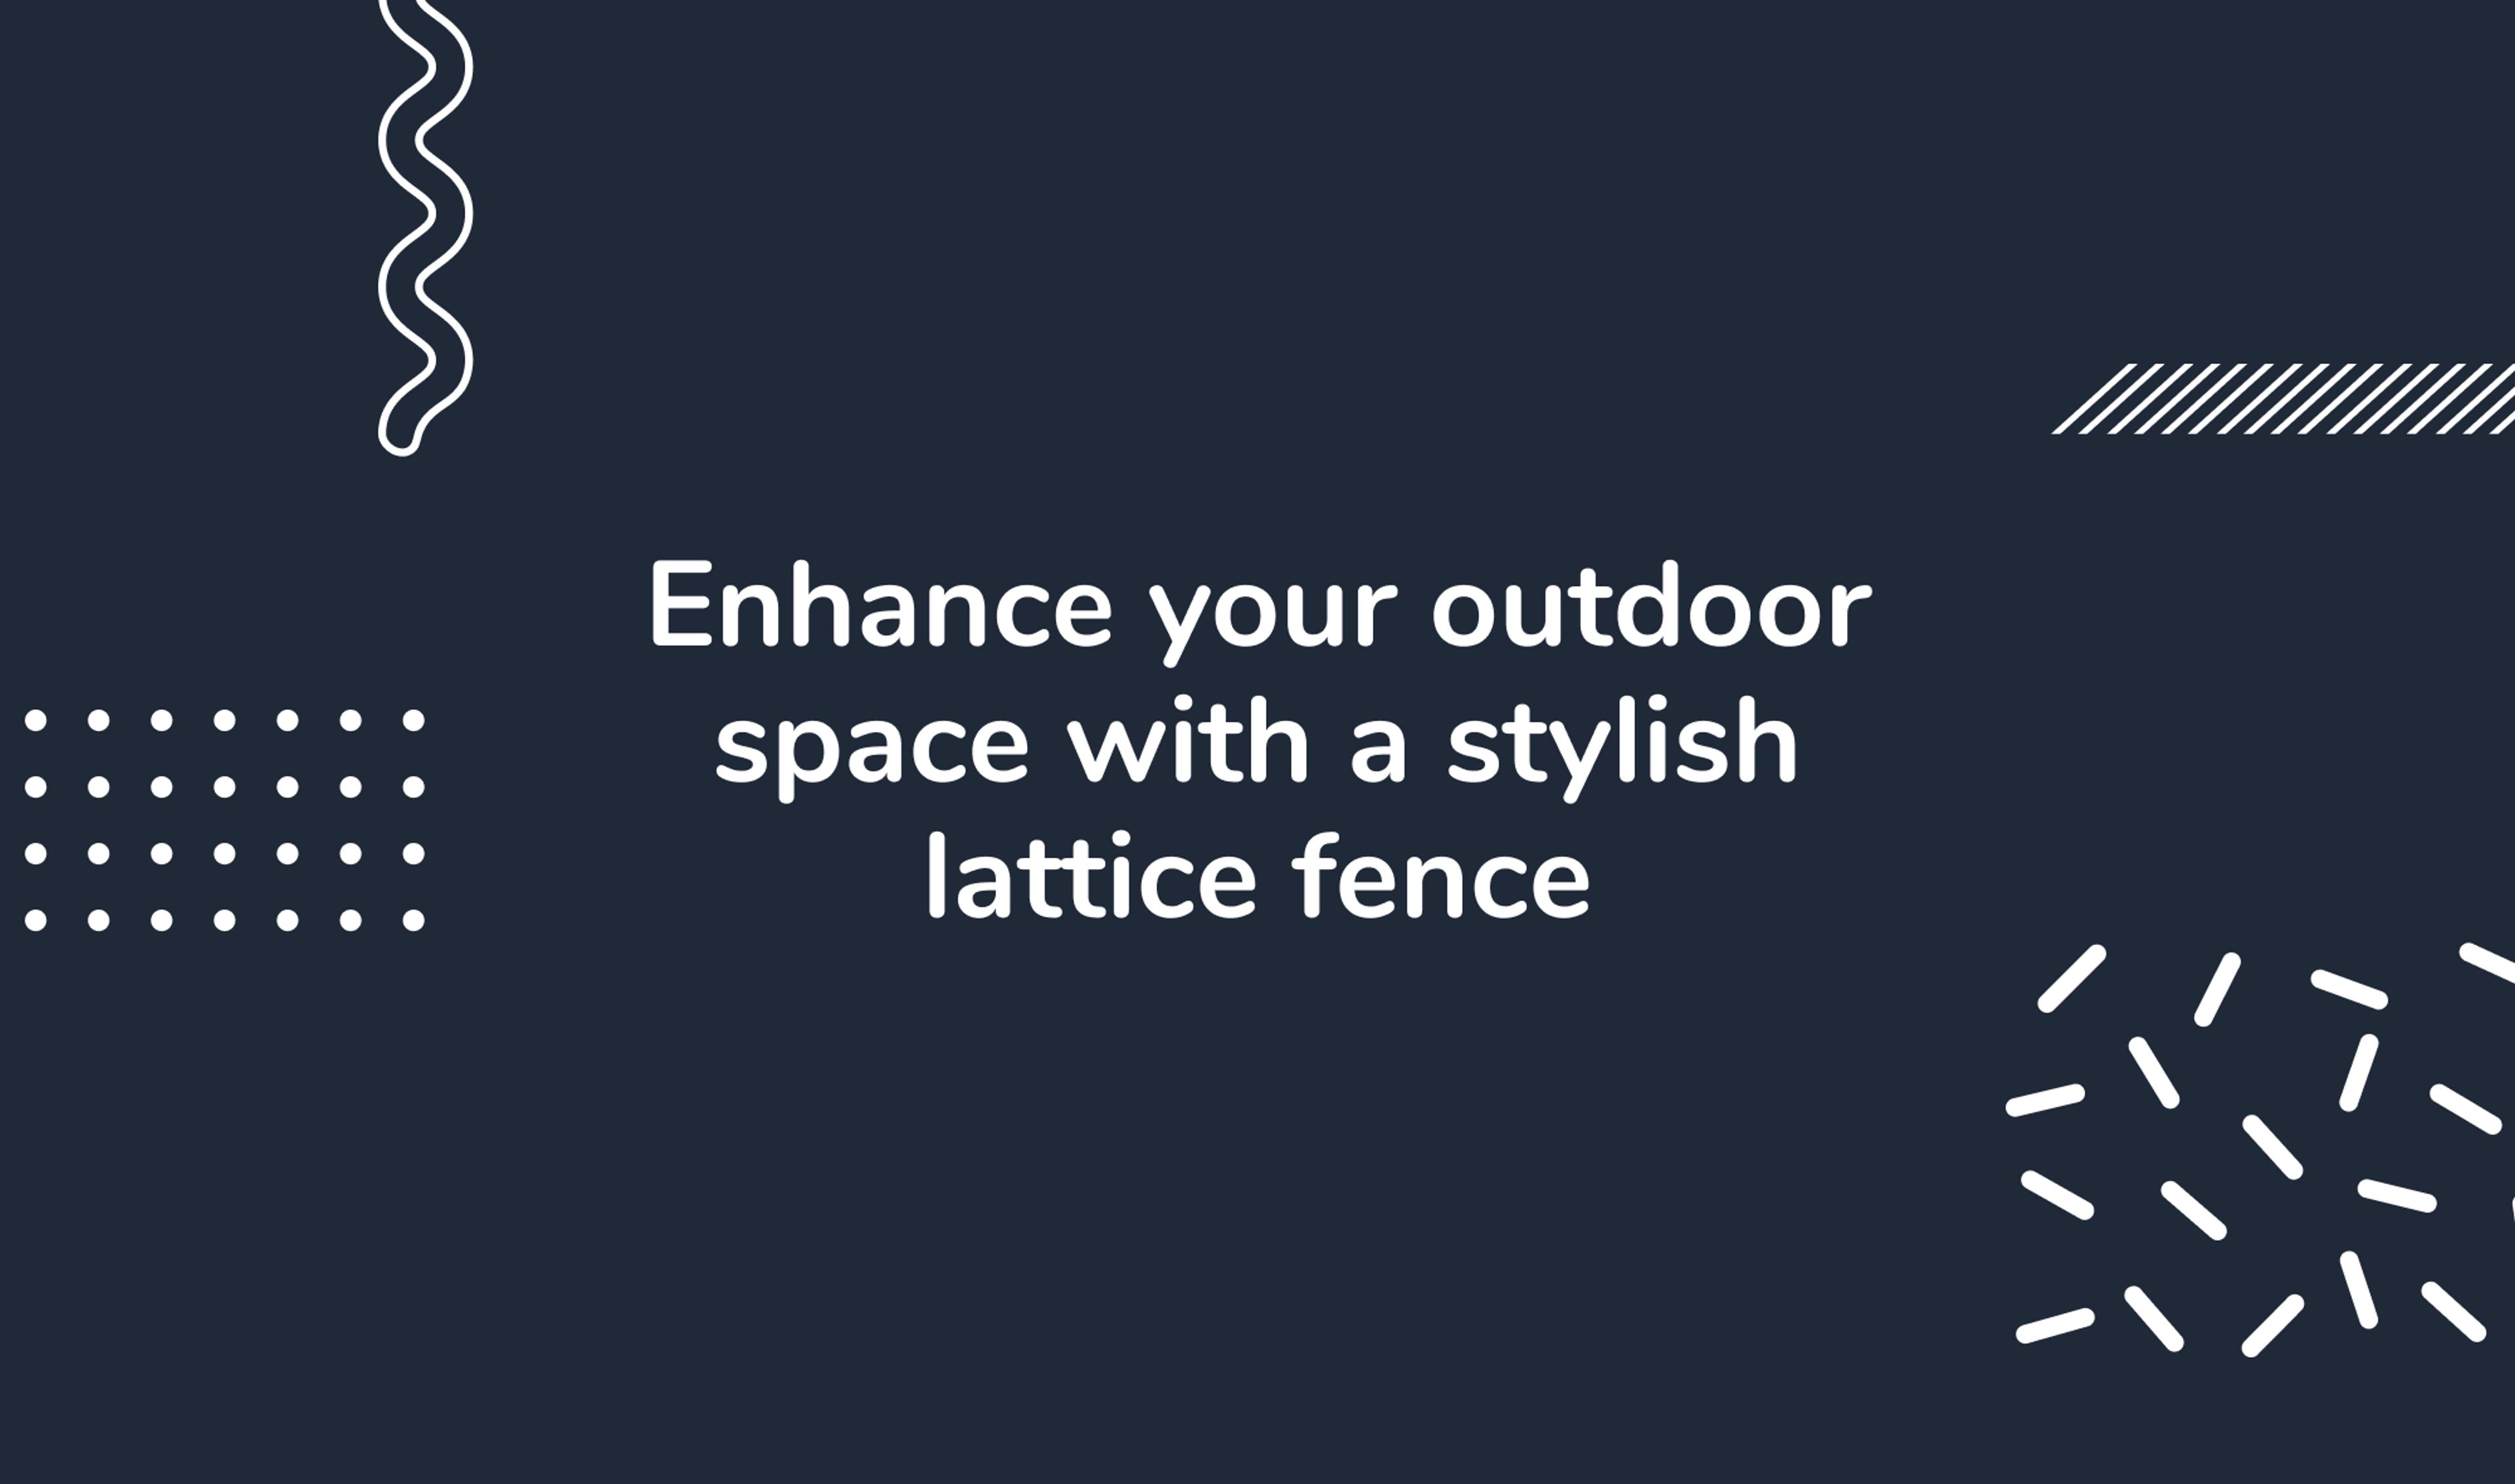 Enhance your outdoor space with a stylish lattice fence